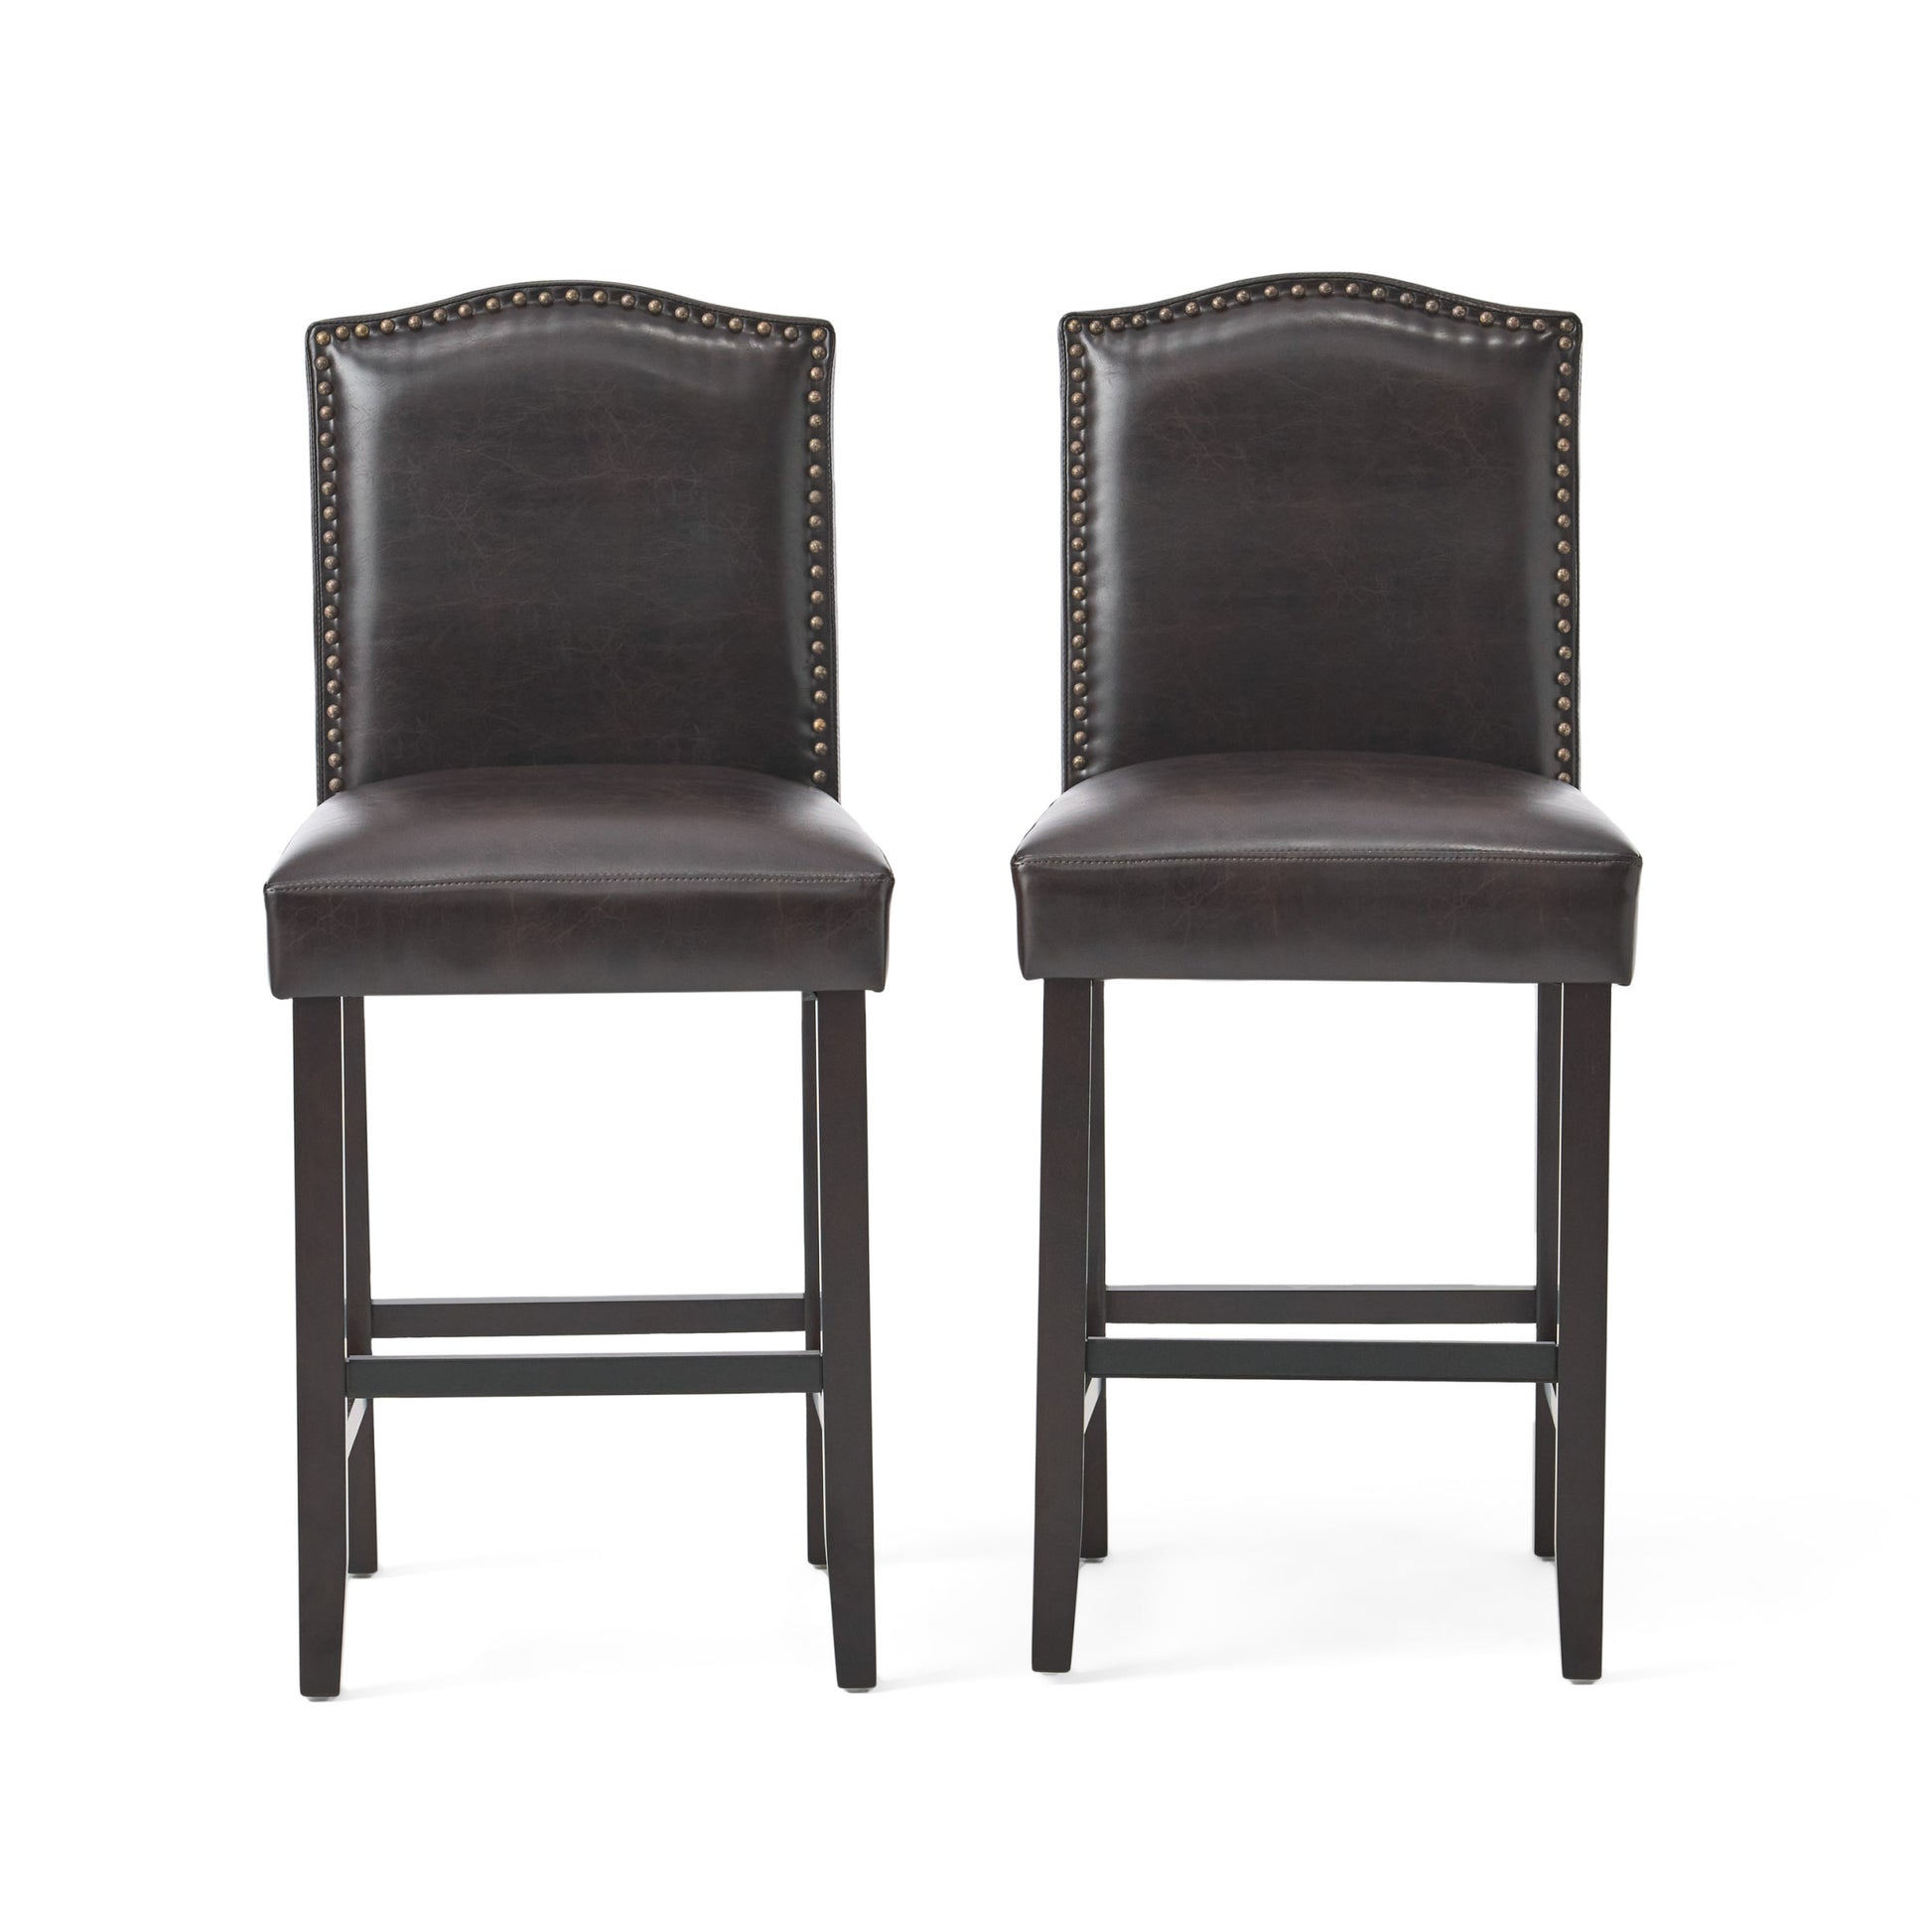 Set of 2, 27" Upholstered Counter Height Barstools brown-pu